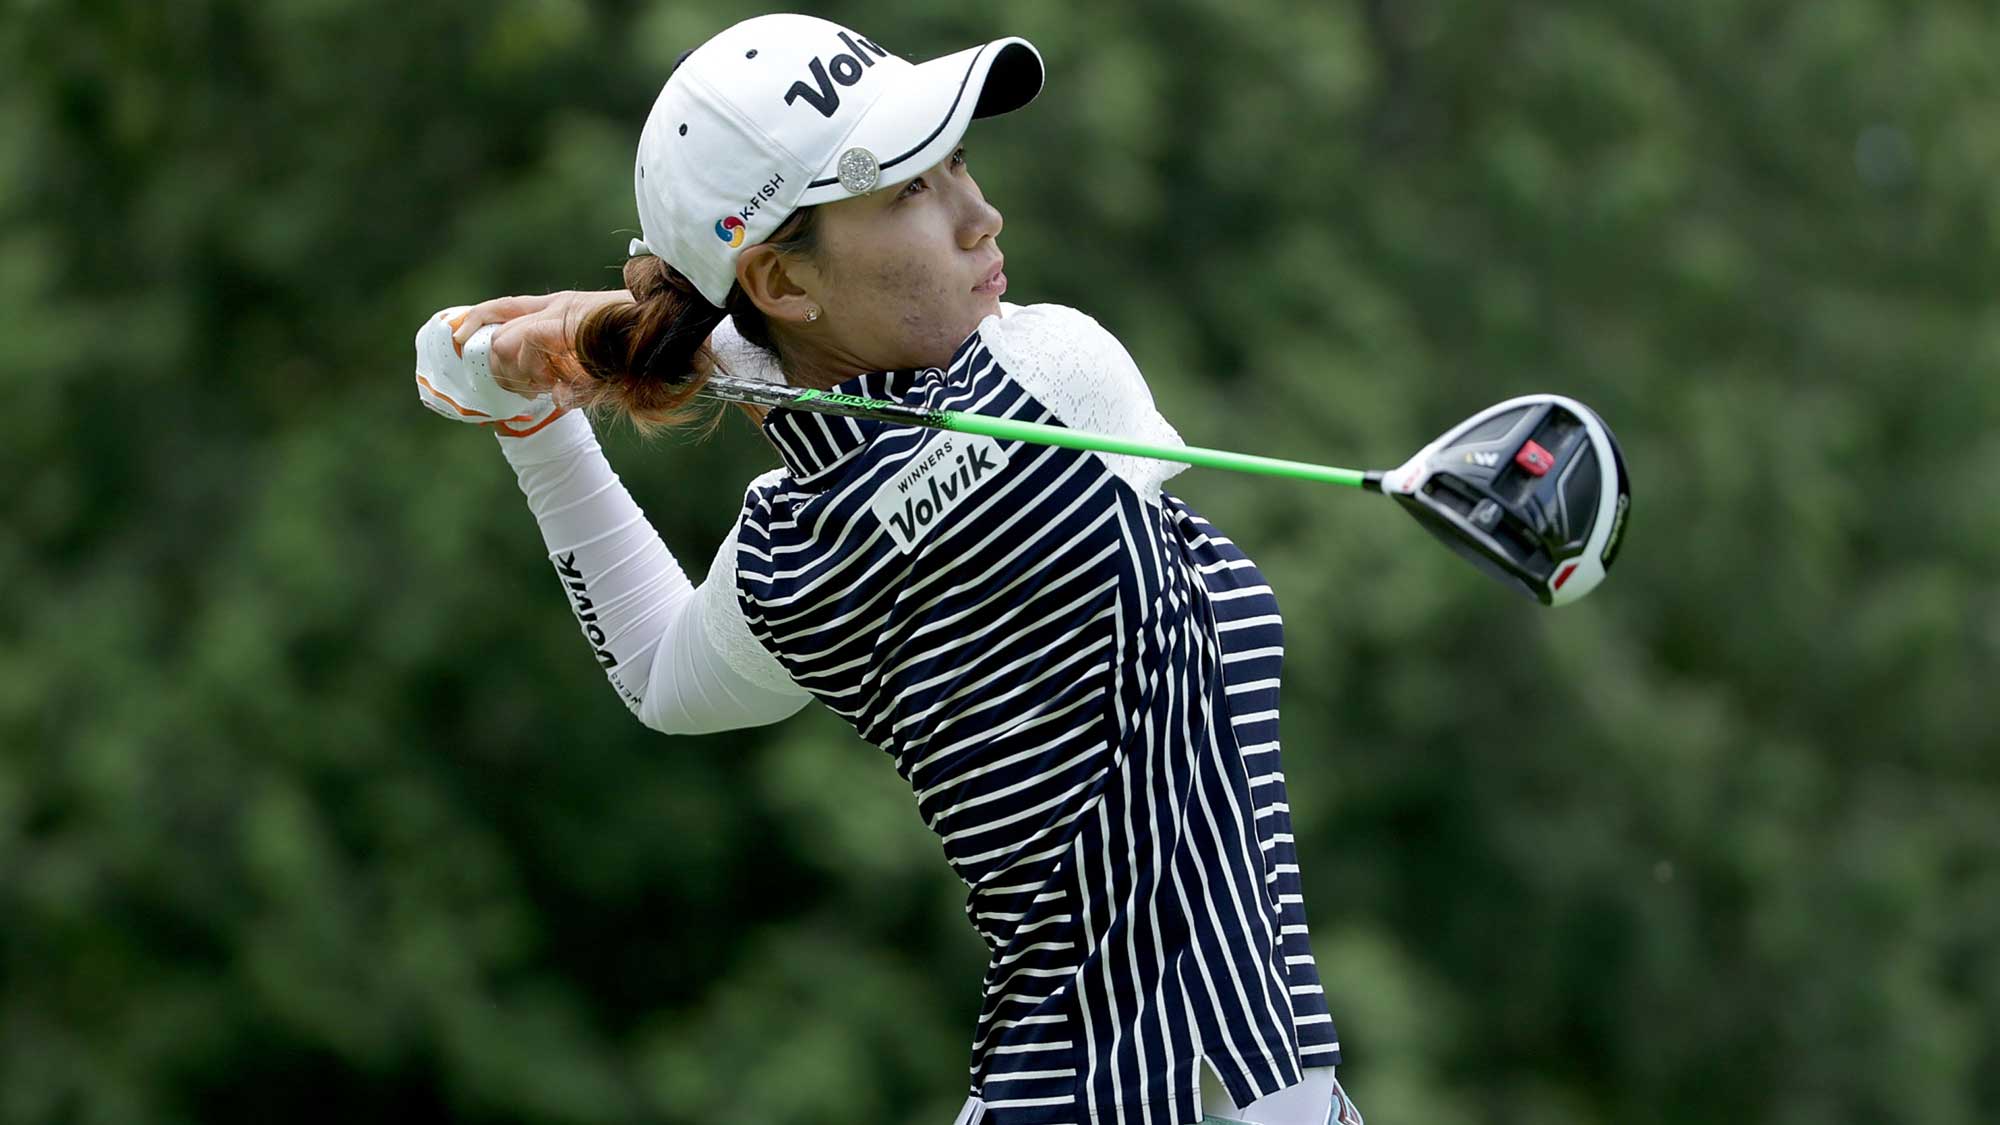 Chelia Choi of South Korea hits a tee shot on the seventh hole during the final round of the KPMG Women's PGA Championship